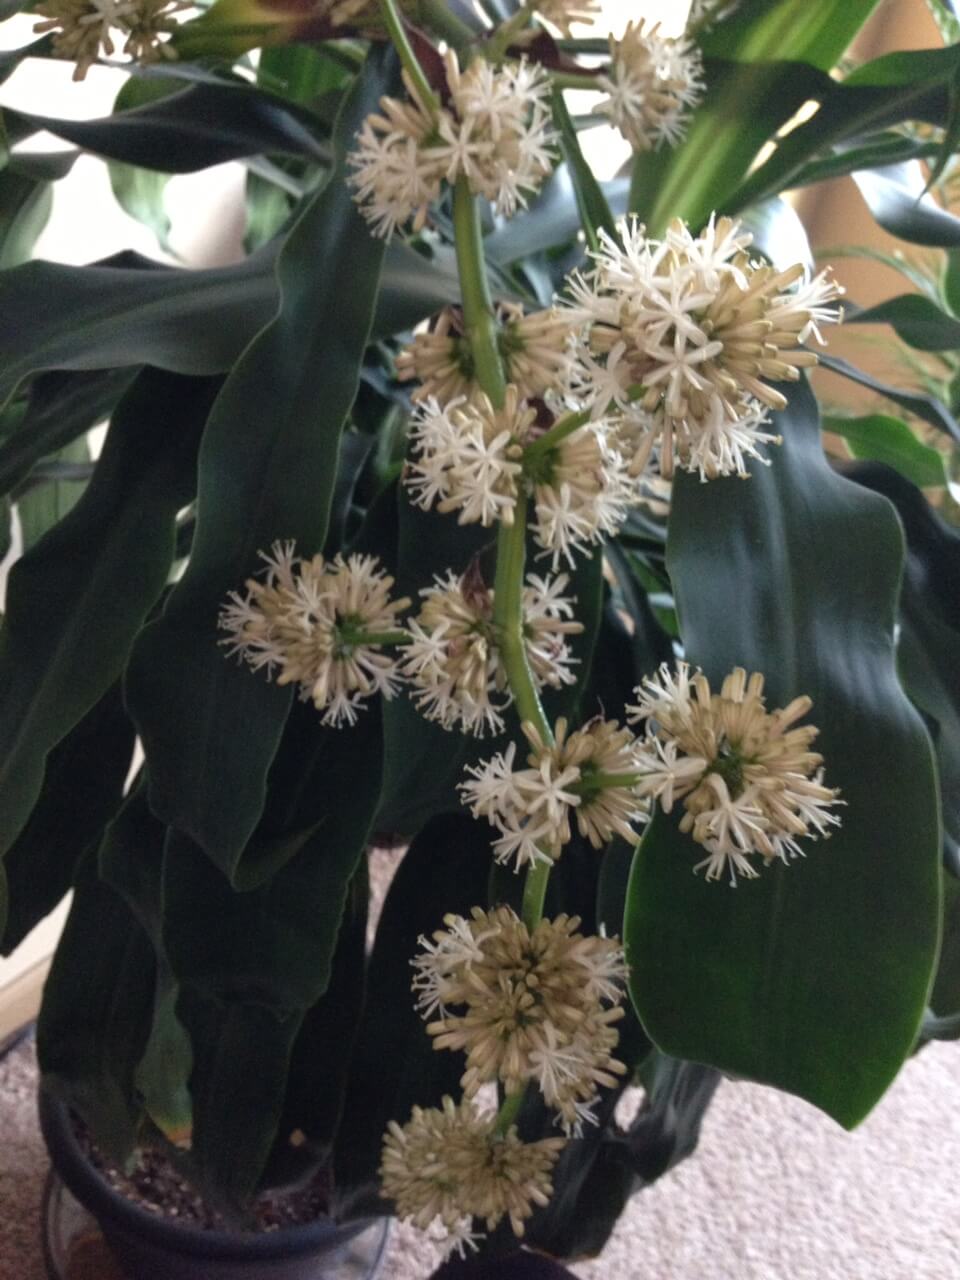 The puffy blooms of Dracaena fragrans are sweetly fragrant.